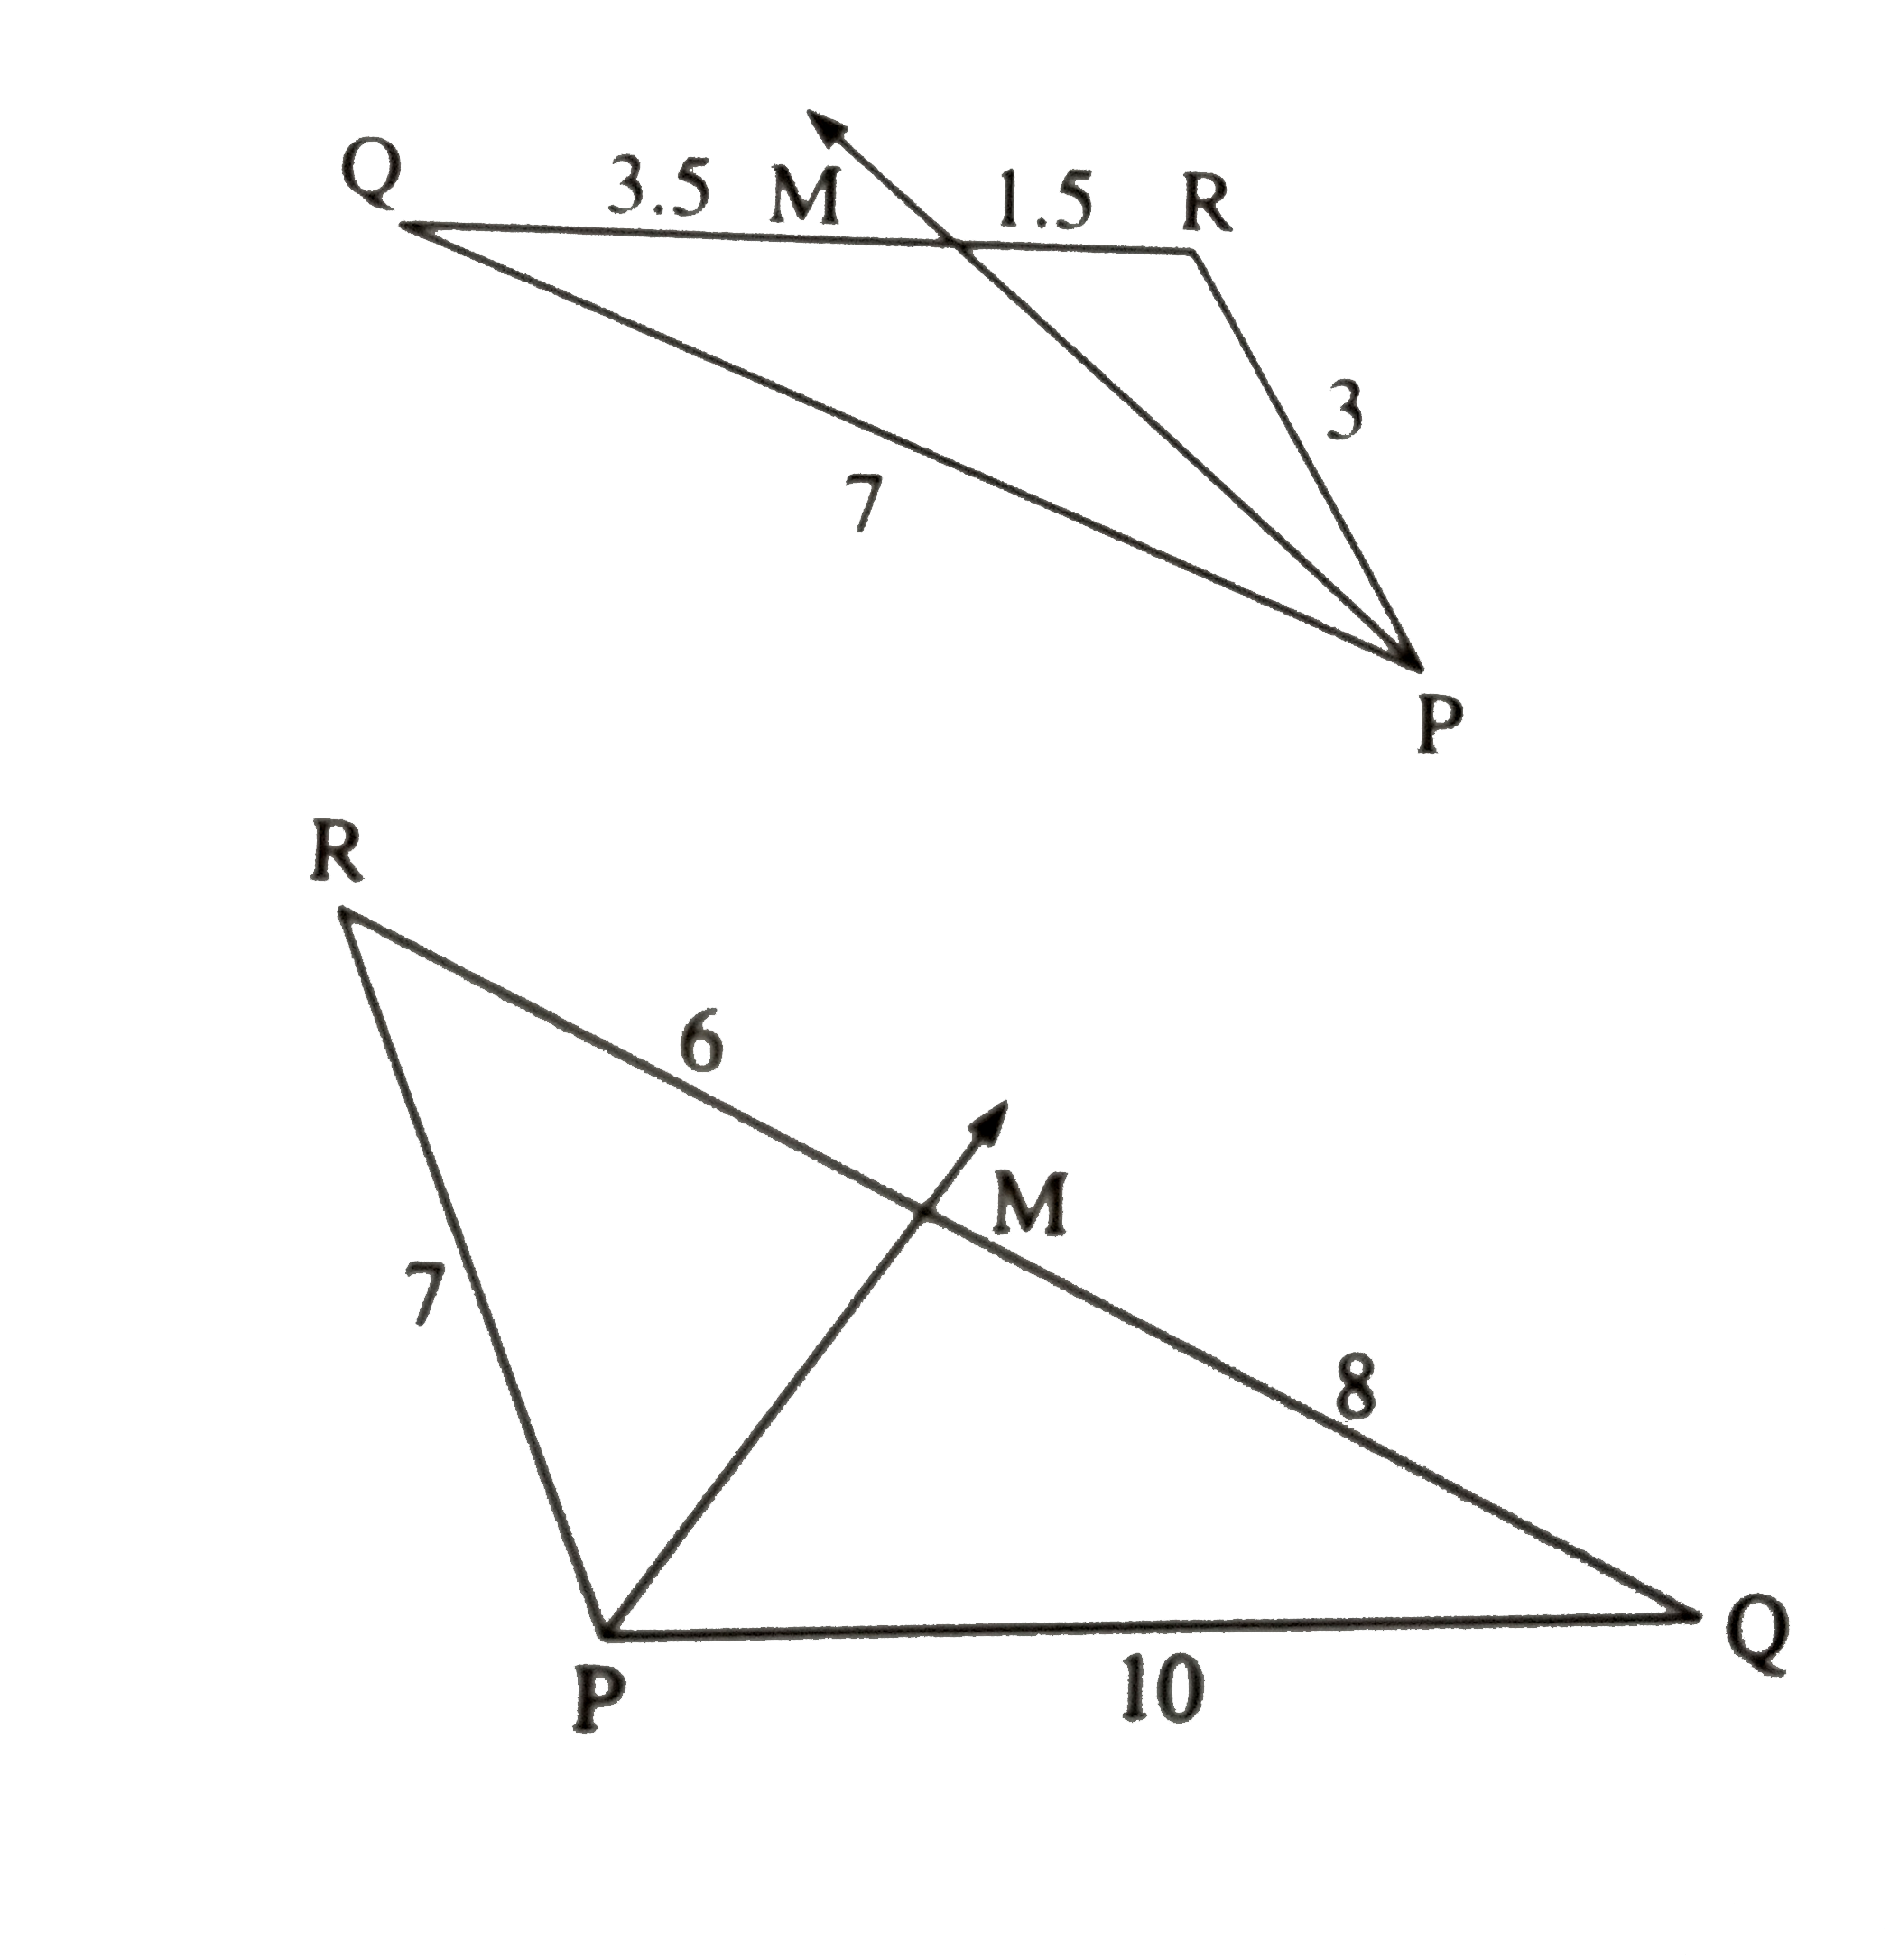 Given below are some triangles and lengths of line segments. Identify in which figures, ray PM is the bisector of /QPR.